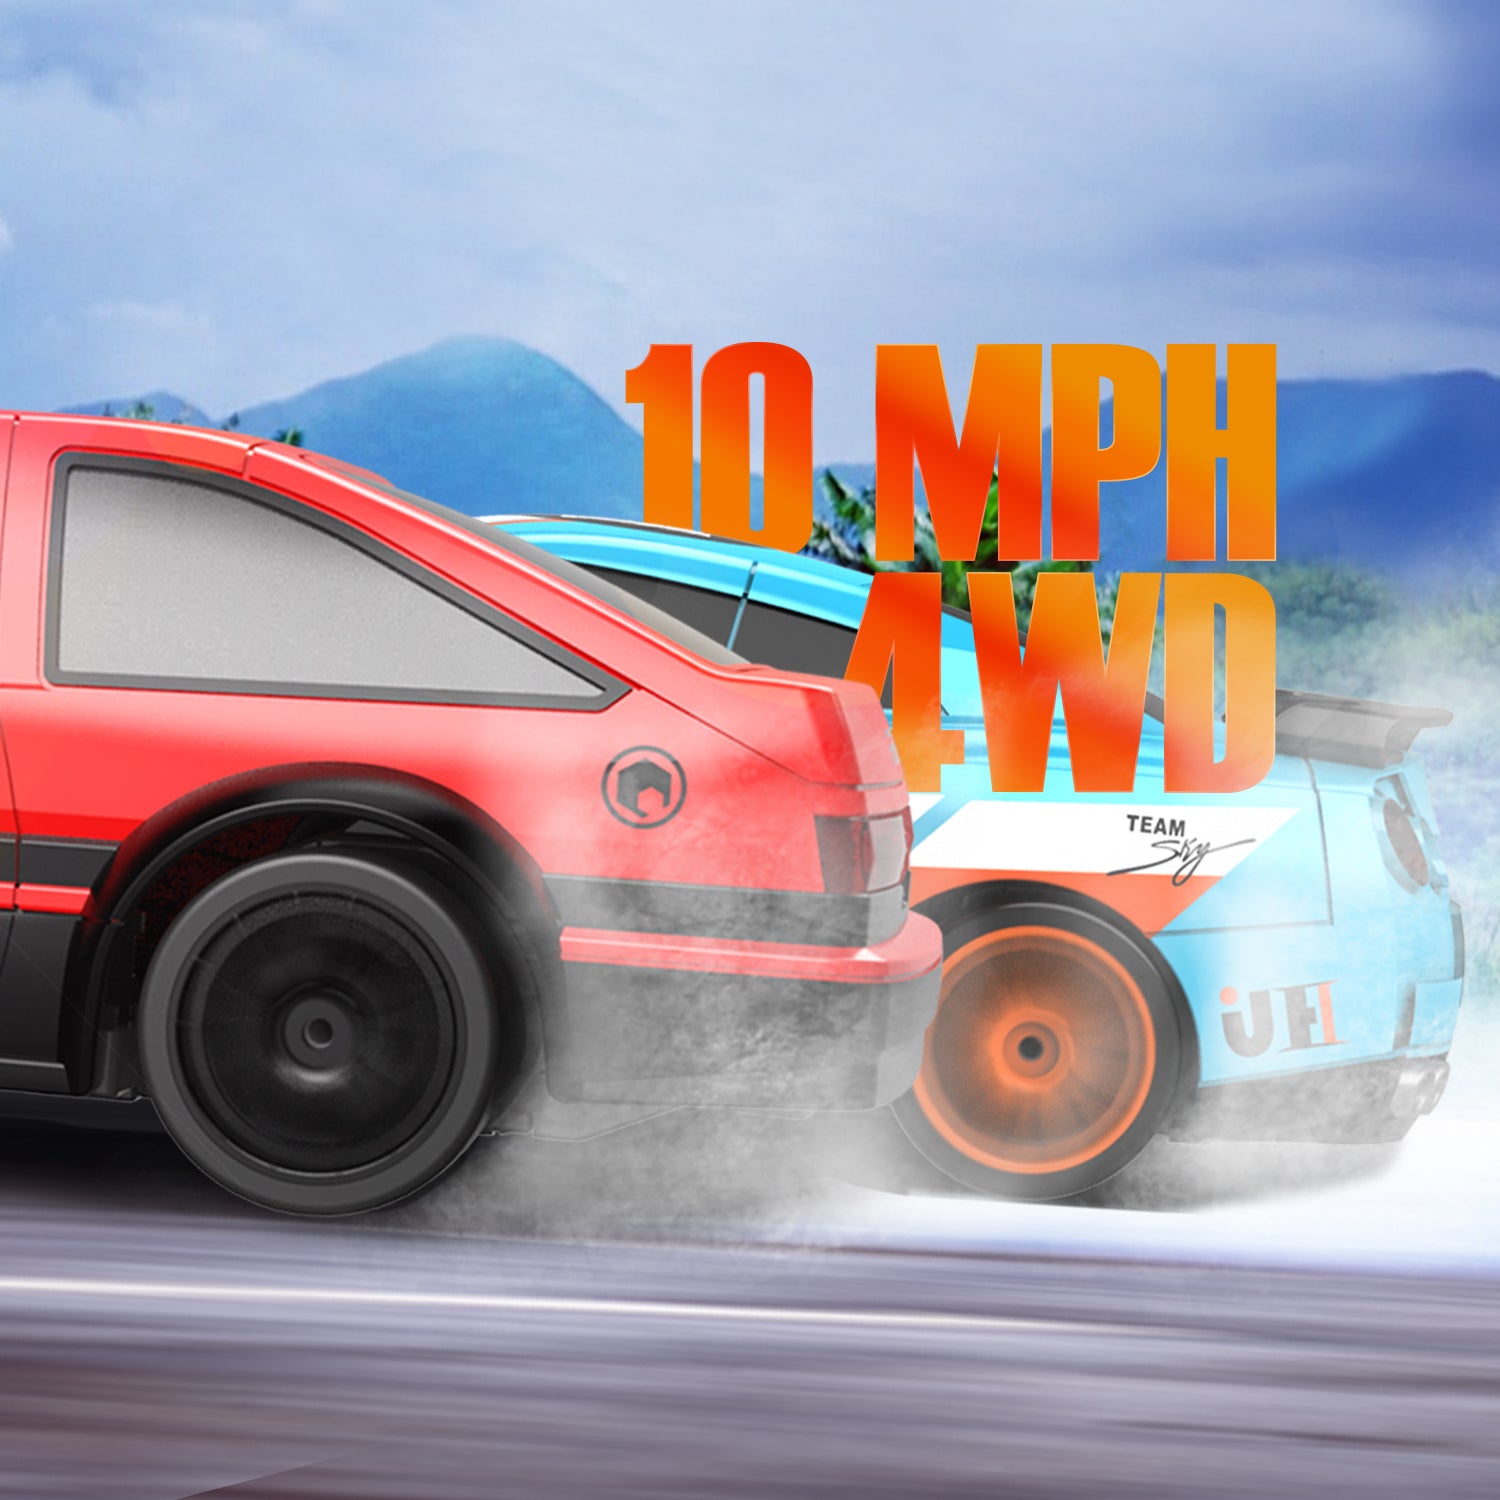 RACENT Zoom Master: 1:24 4WD, 10MPH, LED, Drift Ready